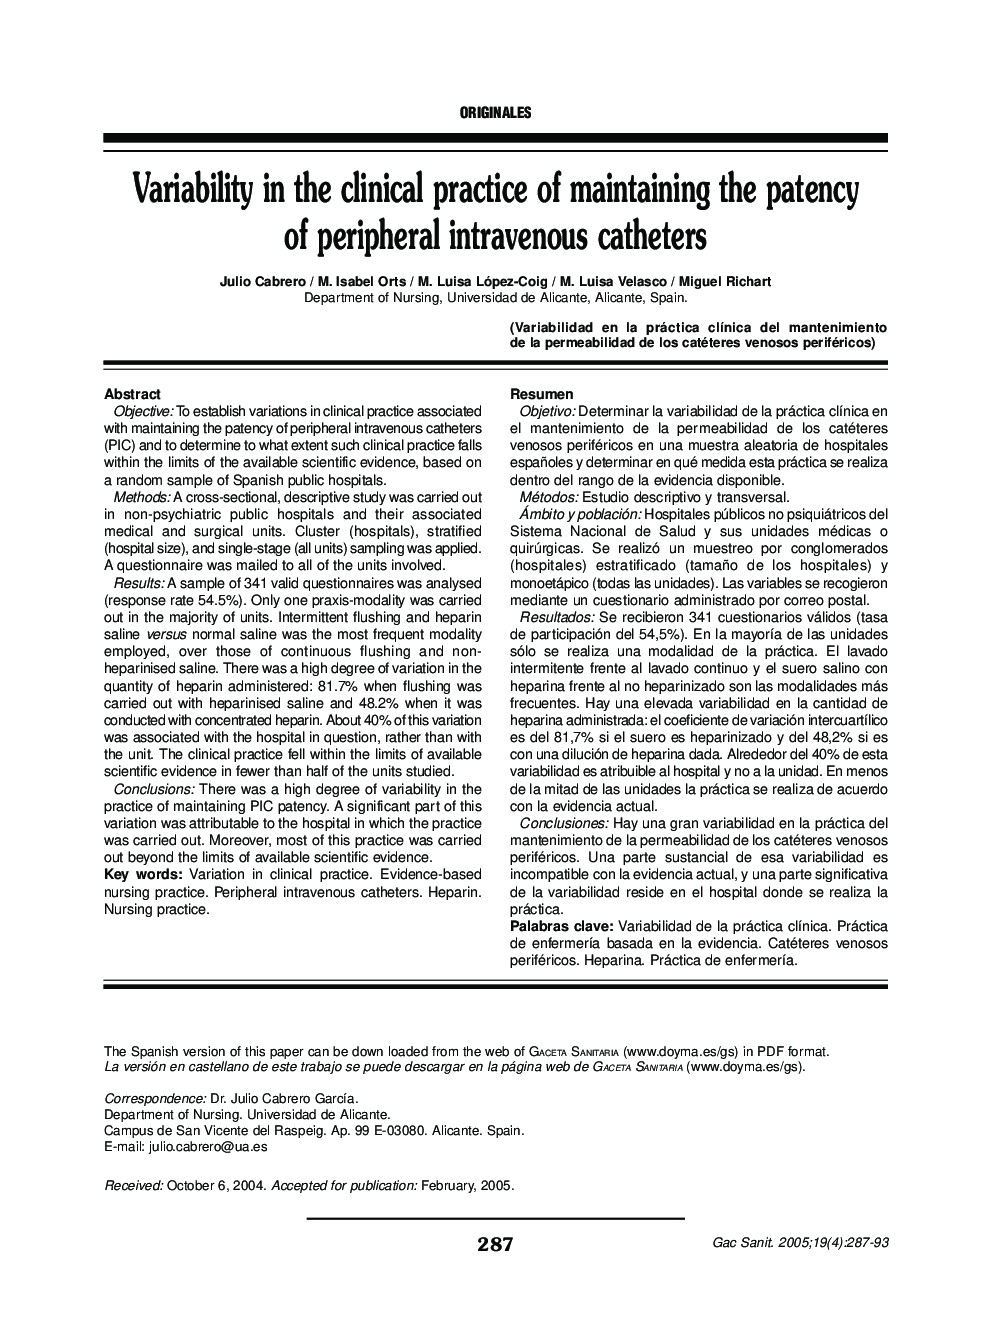 Variability in the clinical practice of maintaining the patency of peripheral intravenous catheters